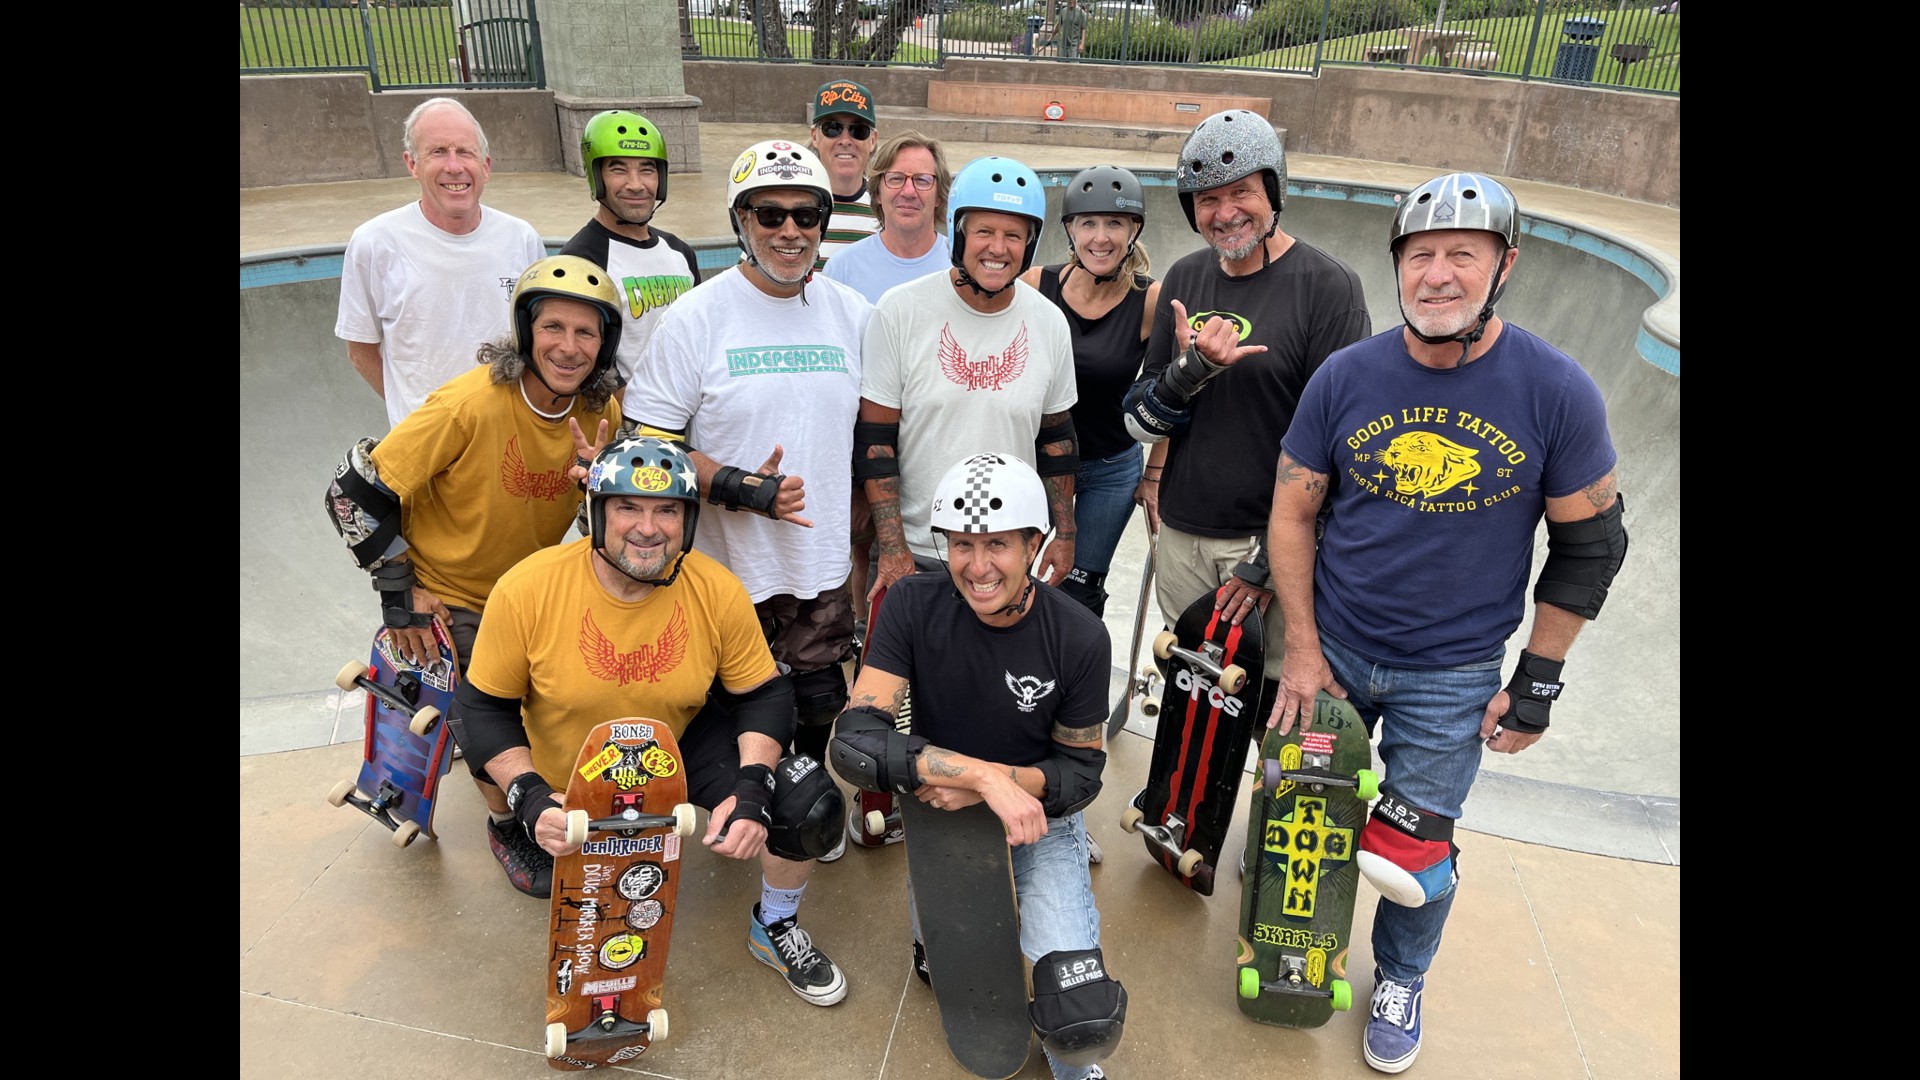 'Death Racer 413' skateboarding club has members in their 50's and 60's.